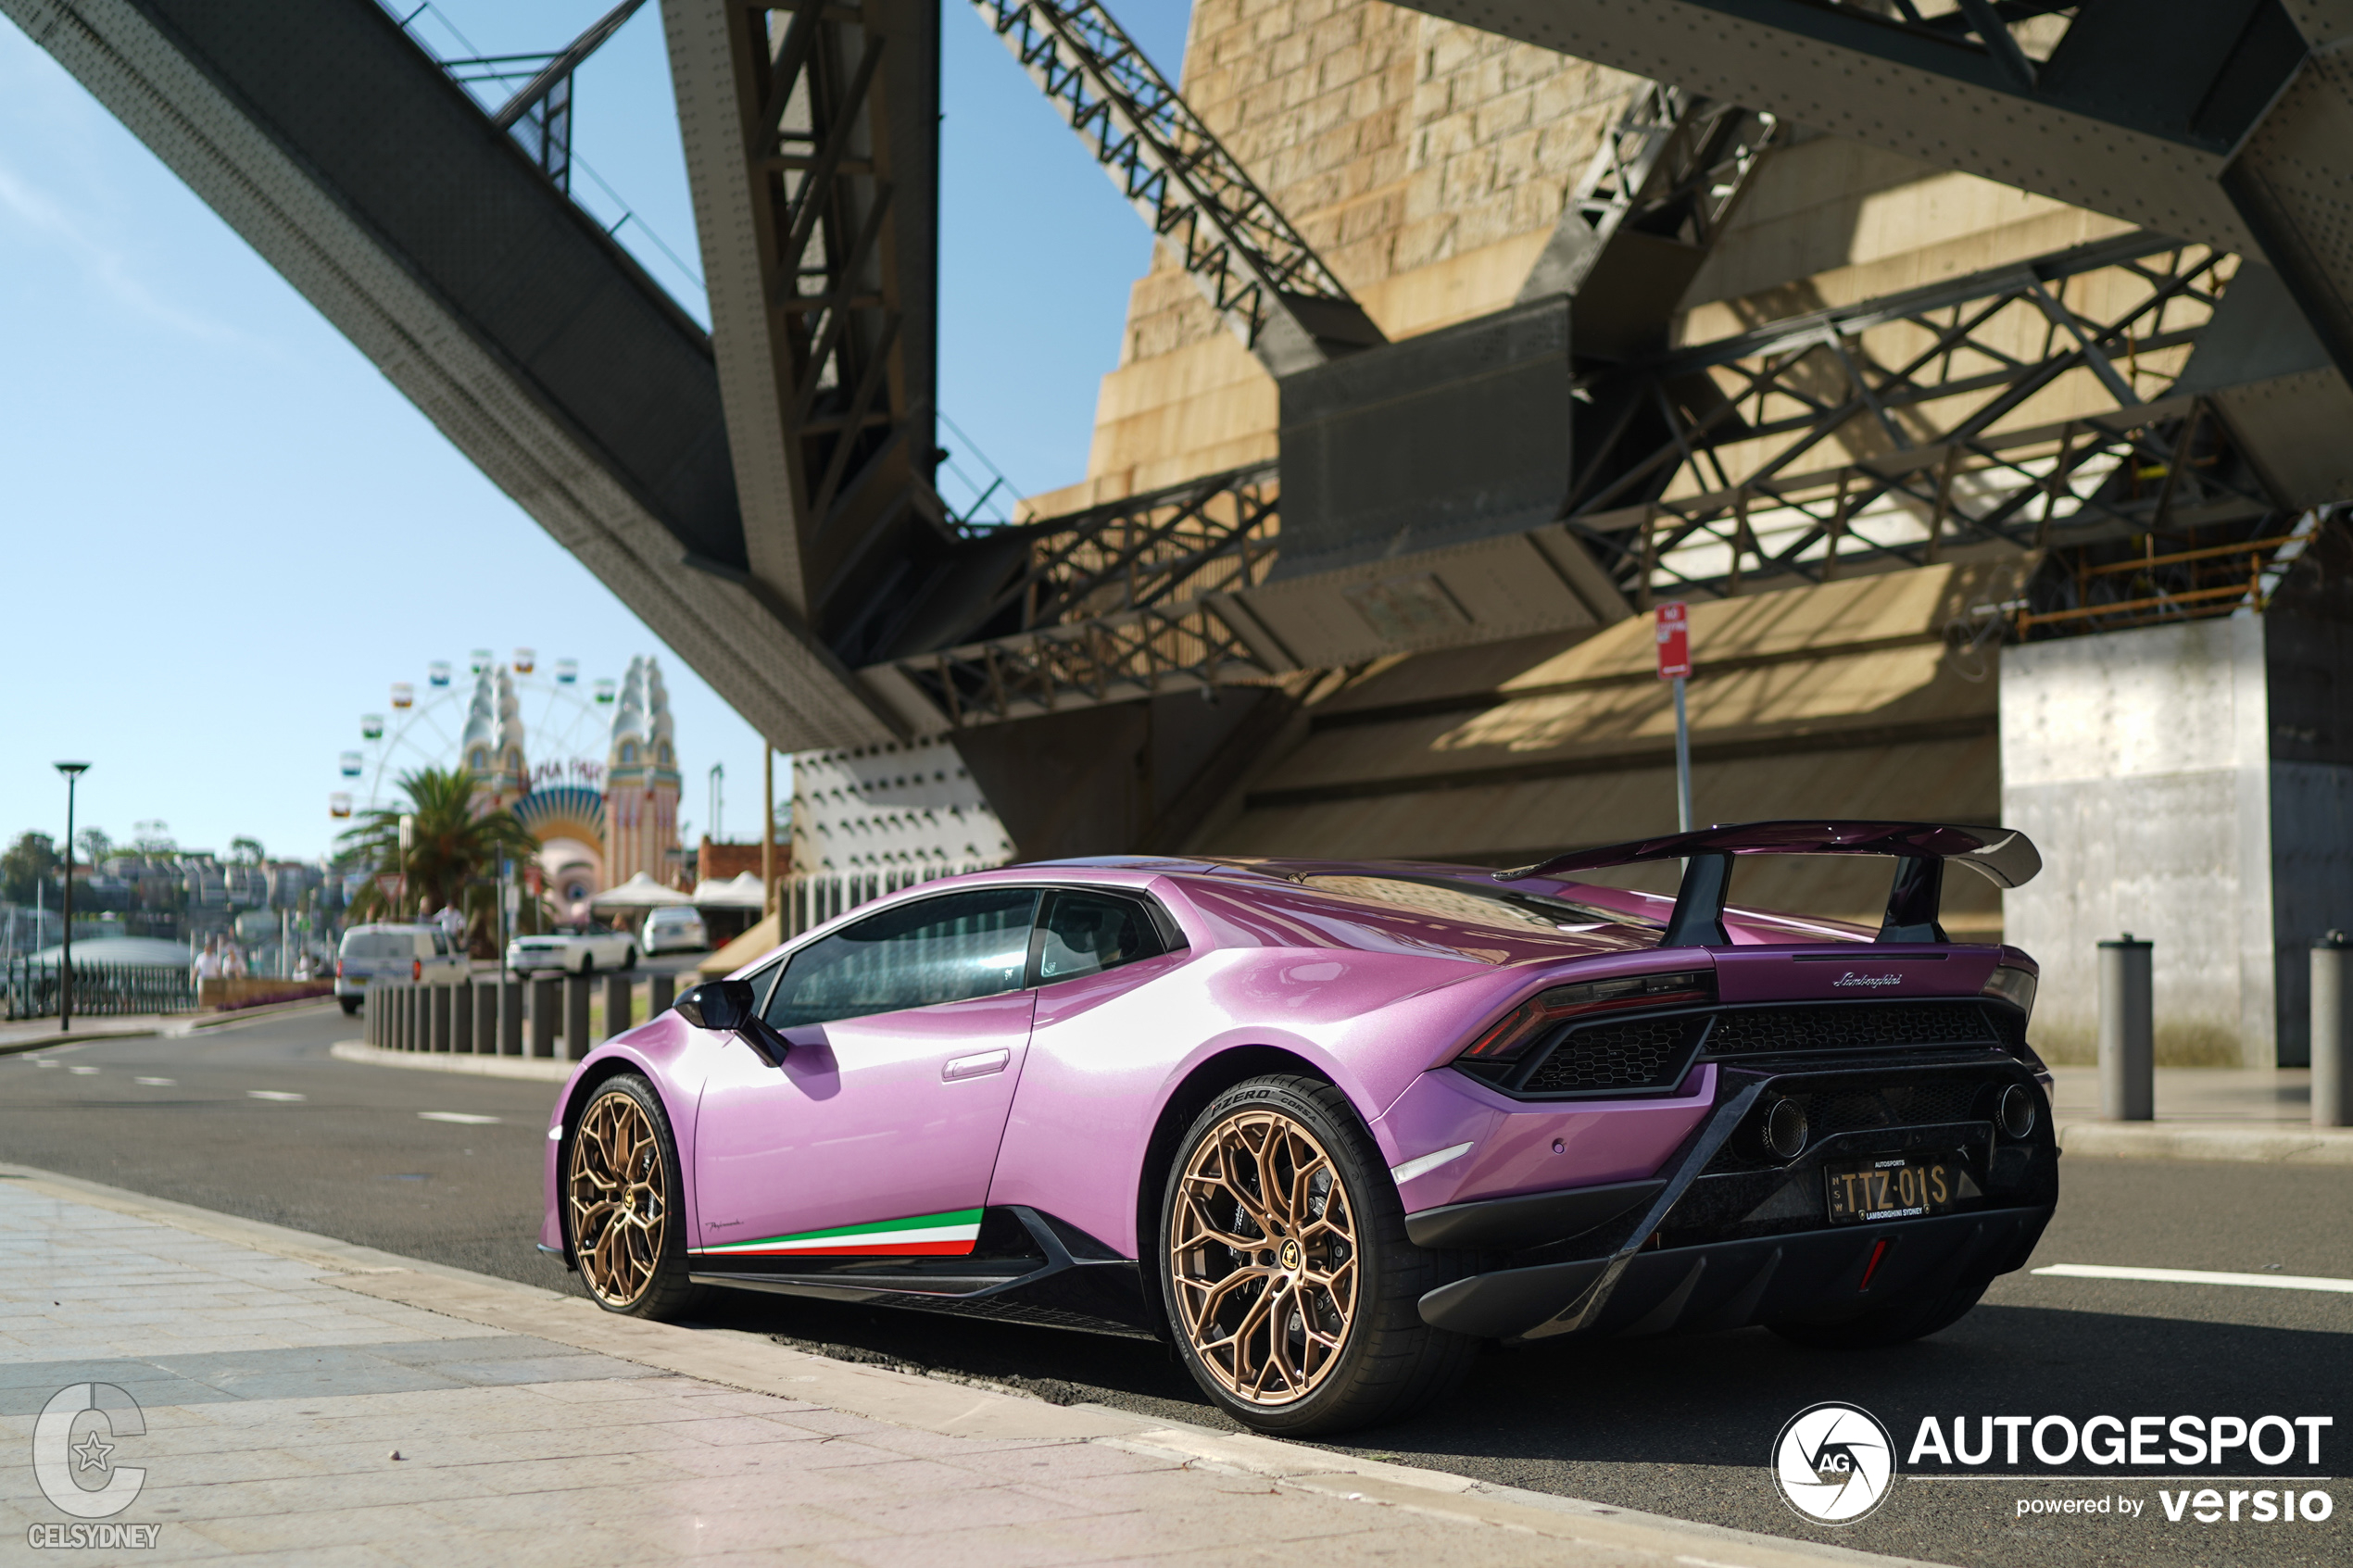 Gorgeous Pictures of a Huracán Performante from Australia